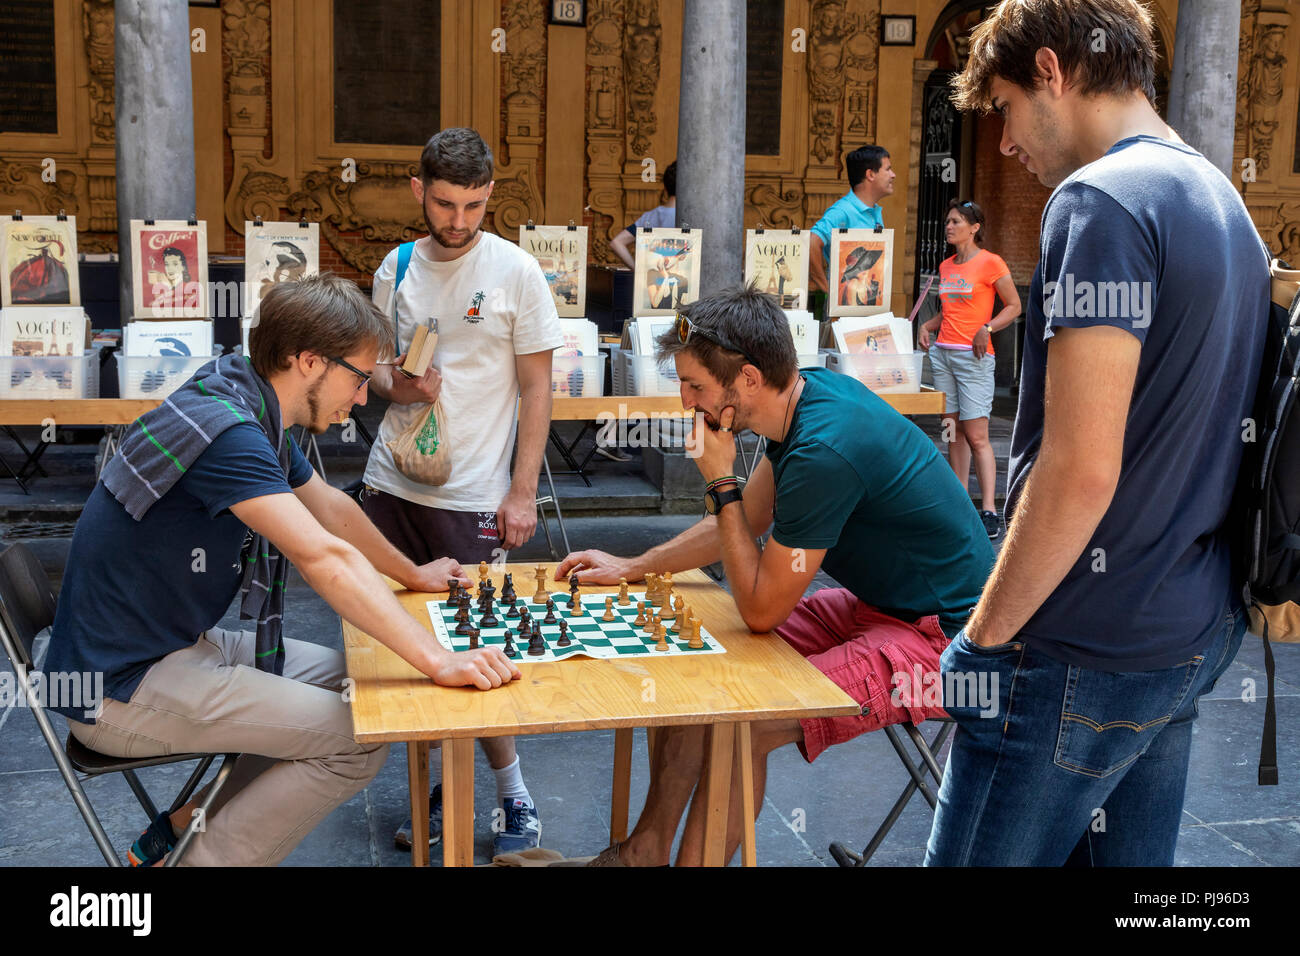 Two men playing chess in the old book, music and antiques market, held in Vielle Bourse de Lille, Place du General de Gaulle, Lille, France Stock Photo